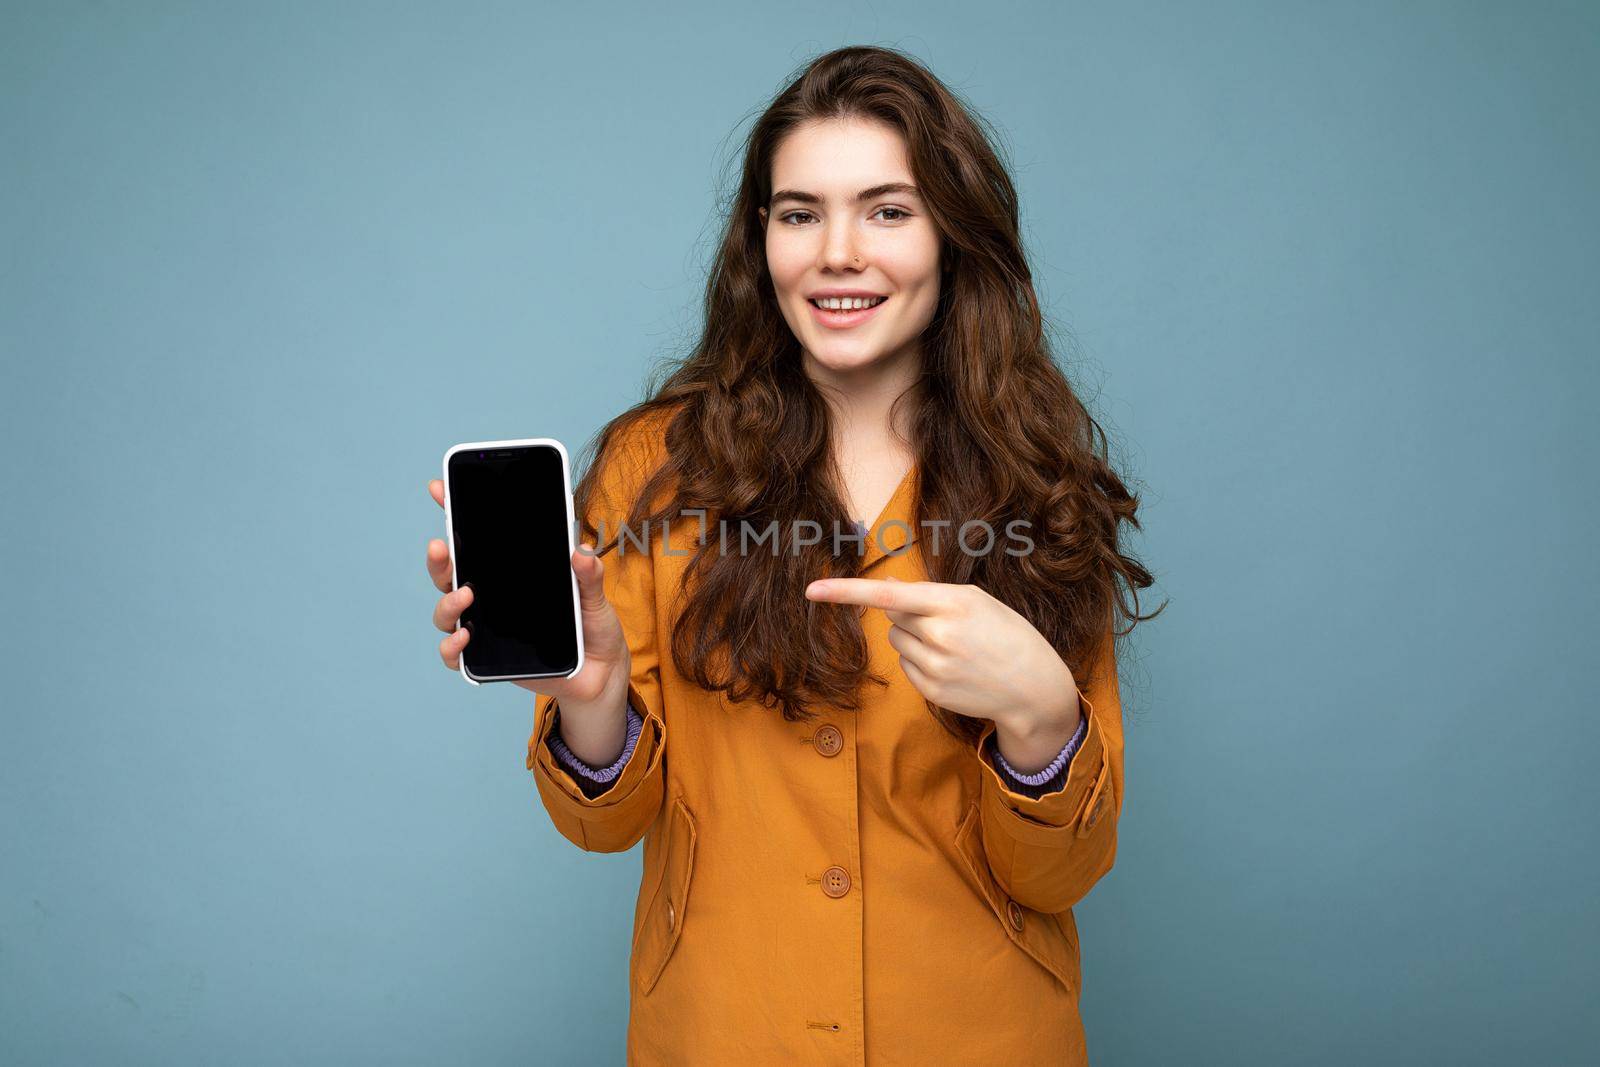 Photo of beautiful smiling young woman good looking wearing casual stylish outfit standing isolated on background with copy space holding smartphone showing phone in hand with empty screen display for mockup pointing at gadjet looking at camera by TRMK